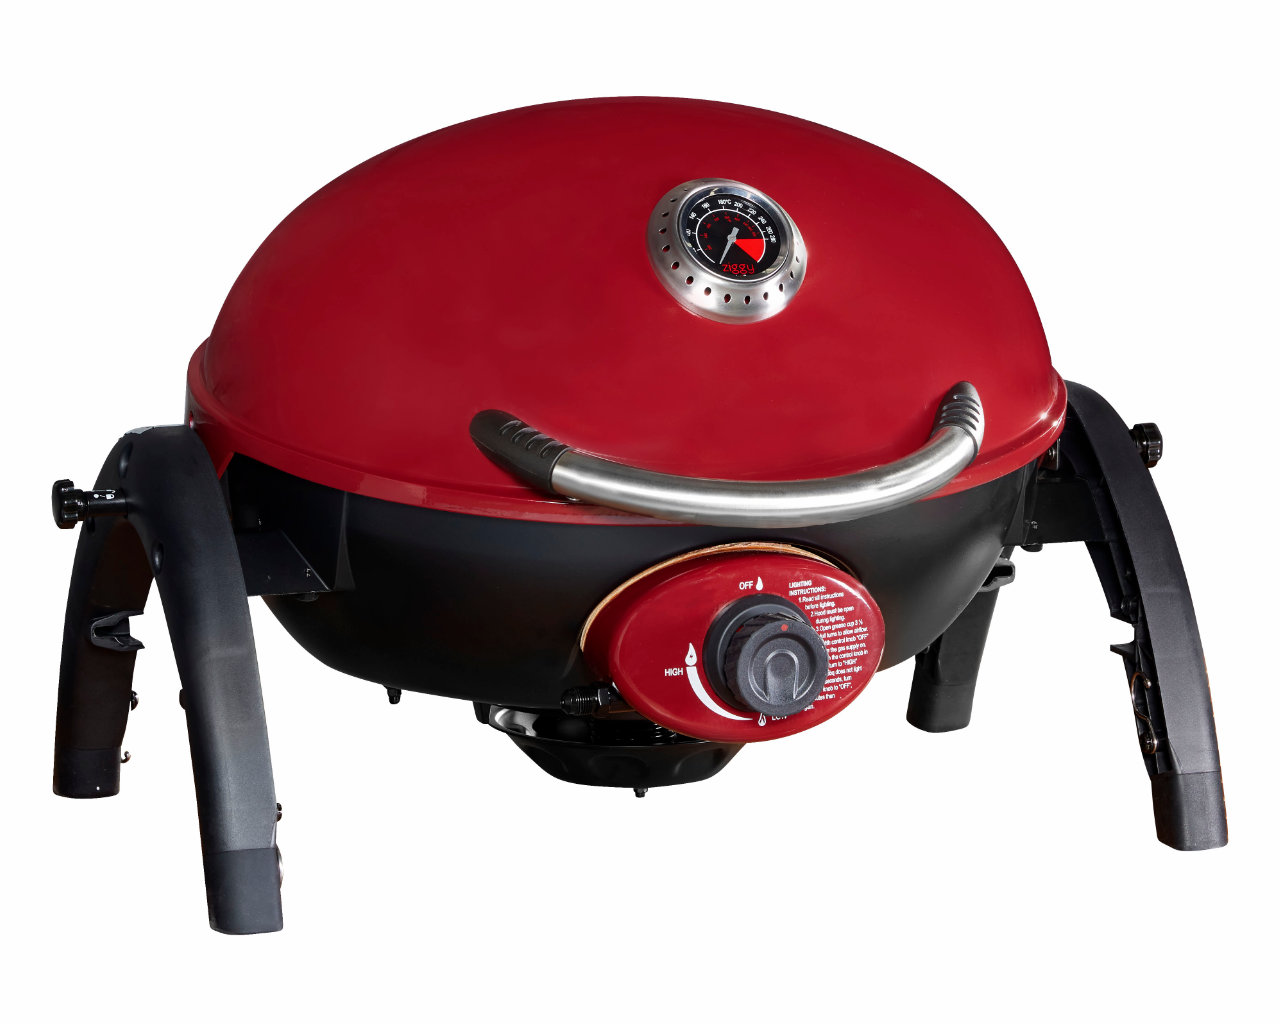 Ziggy Classic Portable Grill LPG BBQ, Chilli Red, small-swatch